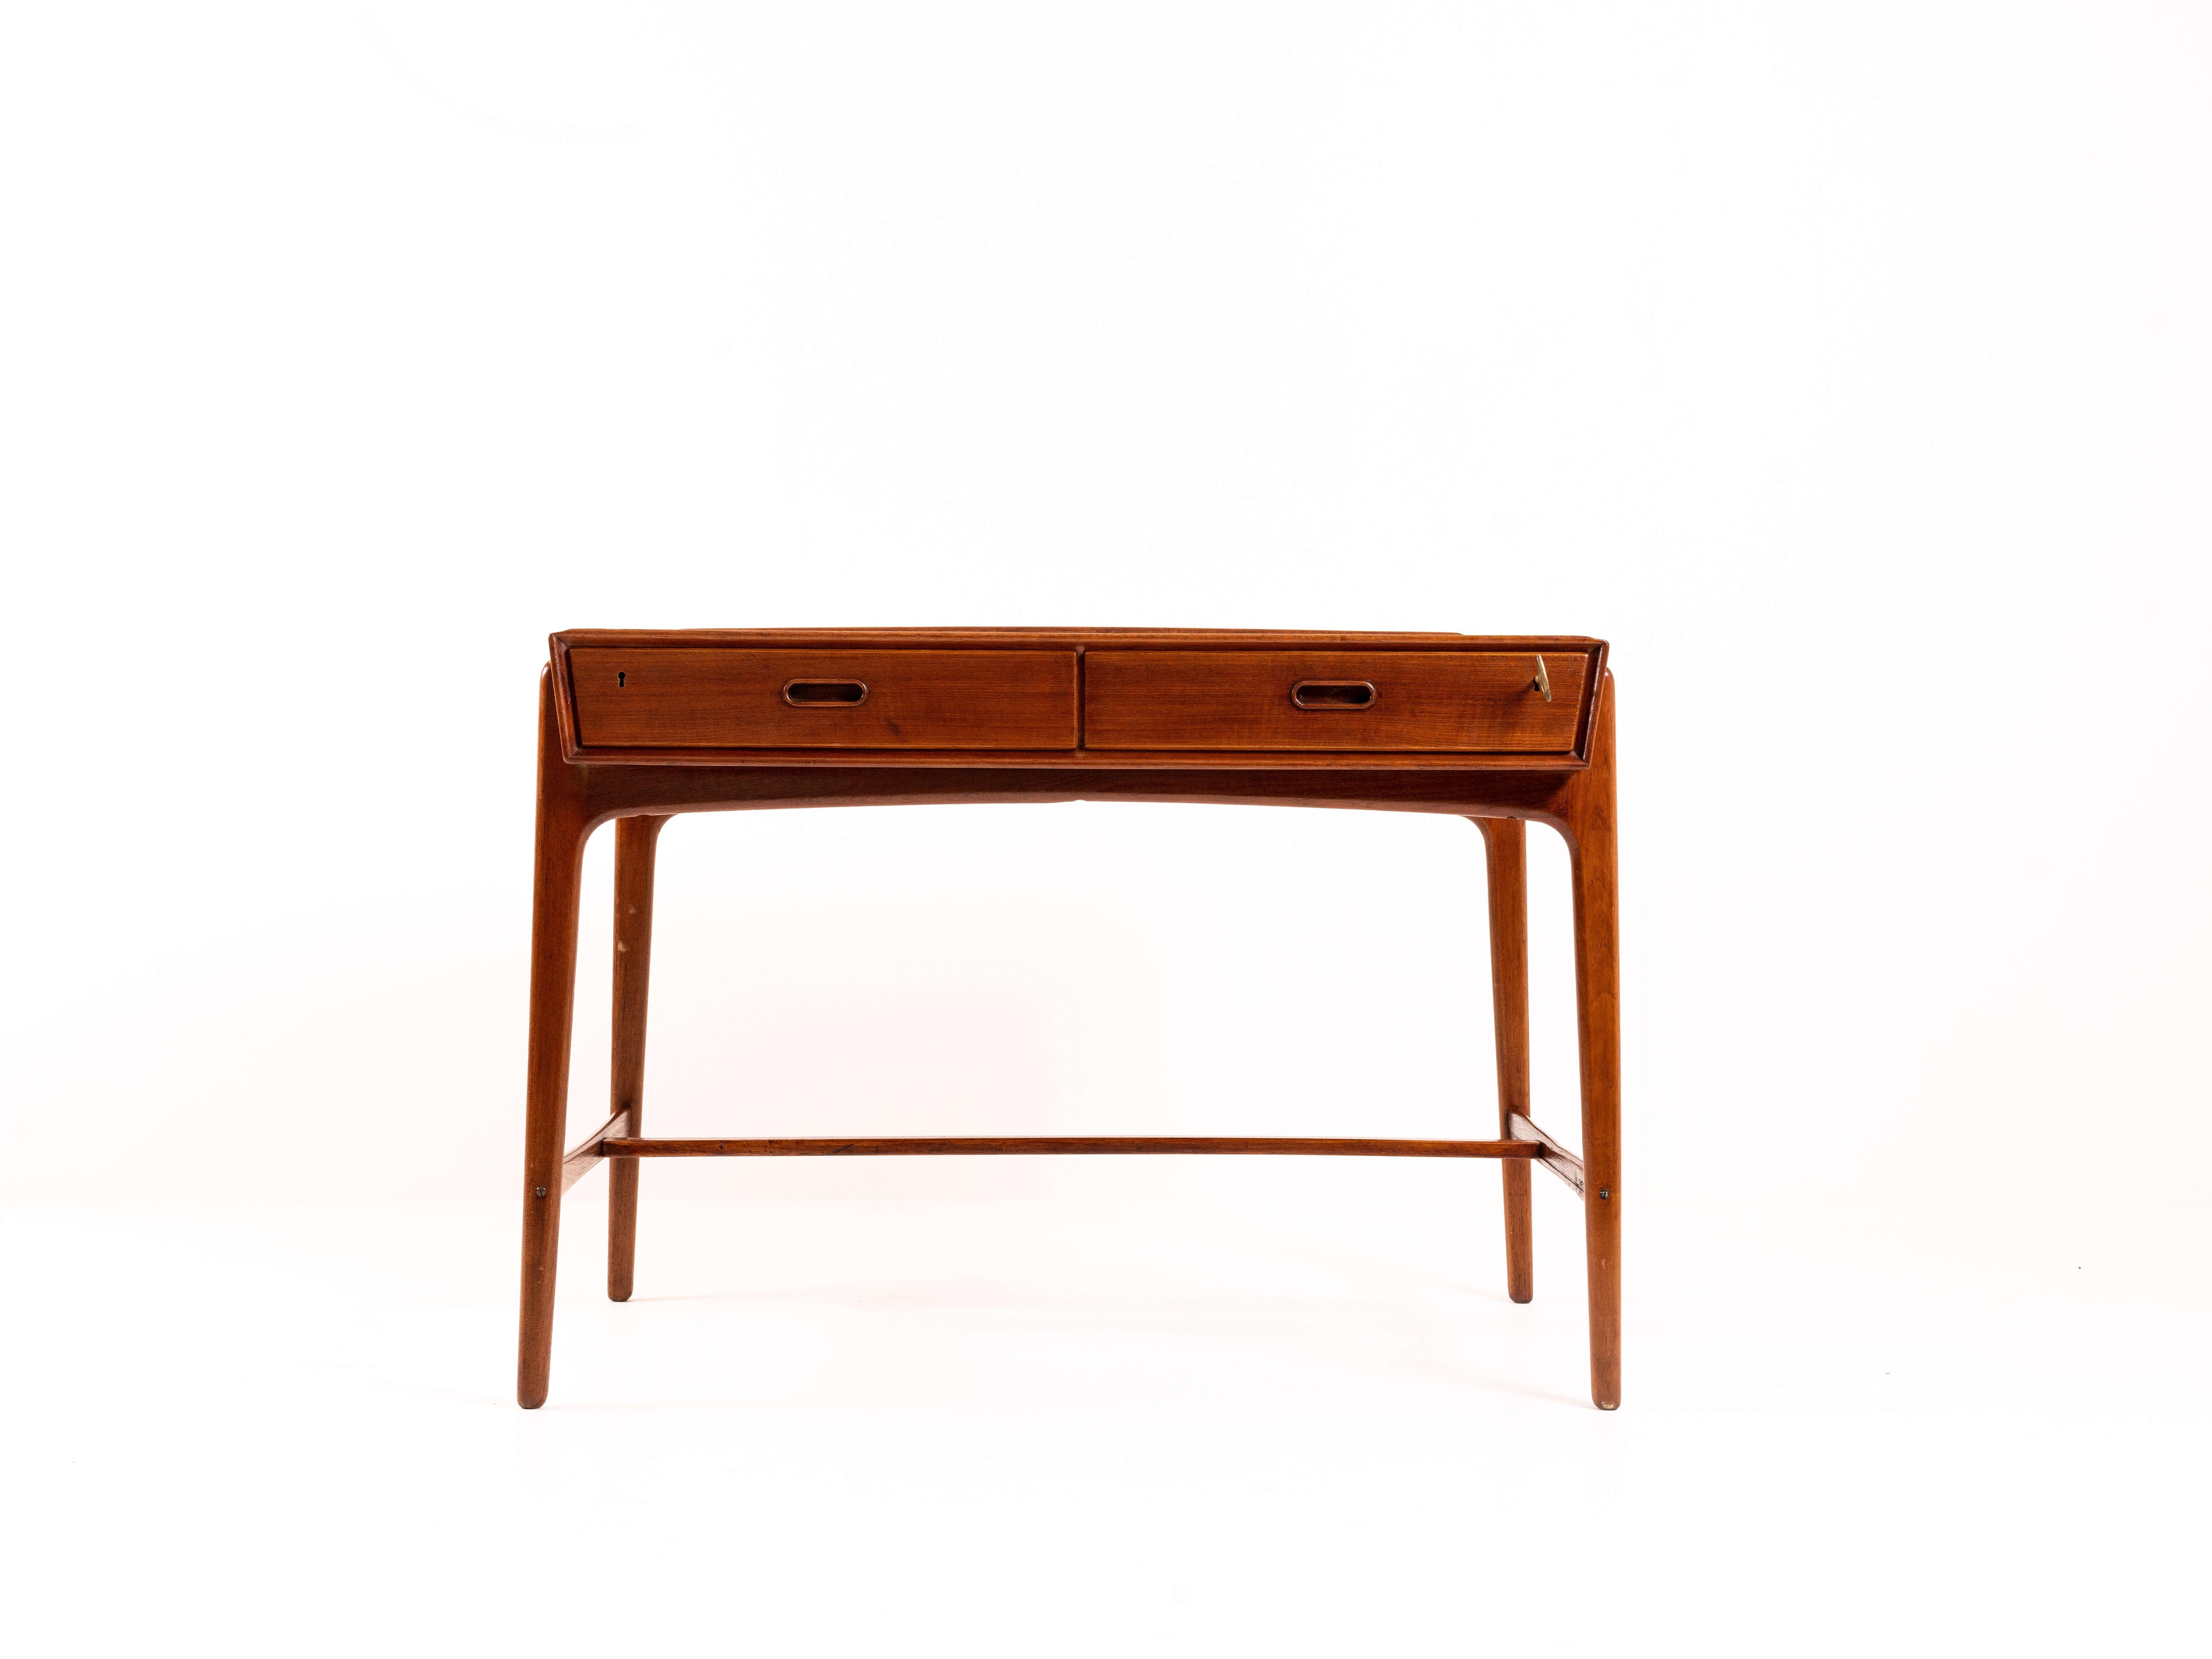 Charming Svend Aage Madsen desk in teak from Denmark the 1950s. This desk is produced by Sigurd Hansen. The design is remarkable and a true example of Danish Mid-Century Modern design and craftsmanship. It has two drawers and nice details; the